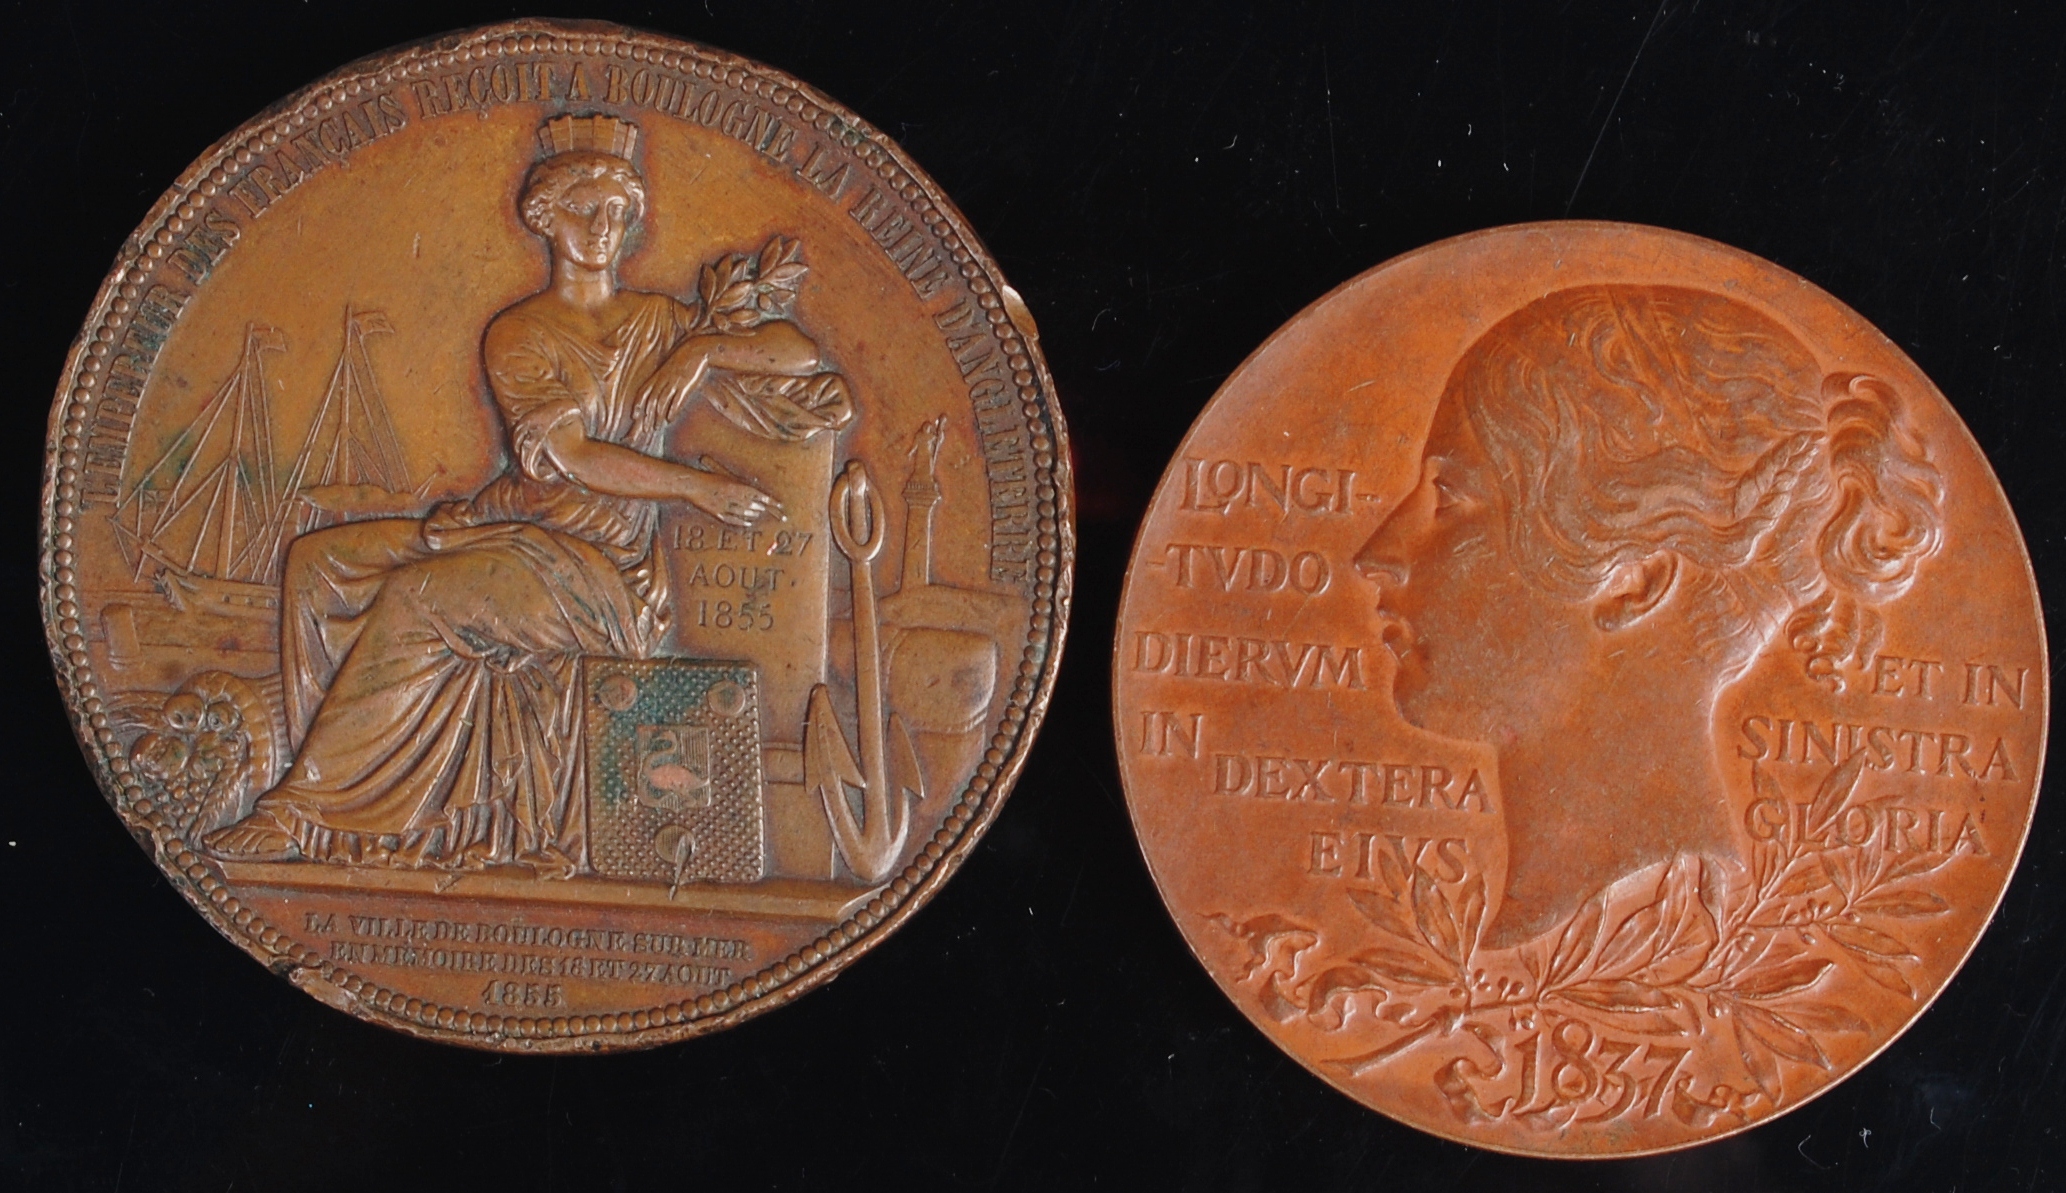 A Reception of Queen Victoria at Boulogne bronze medallion by Albert Barre, together with a Victoria